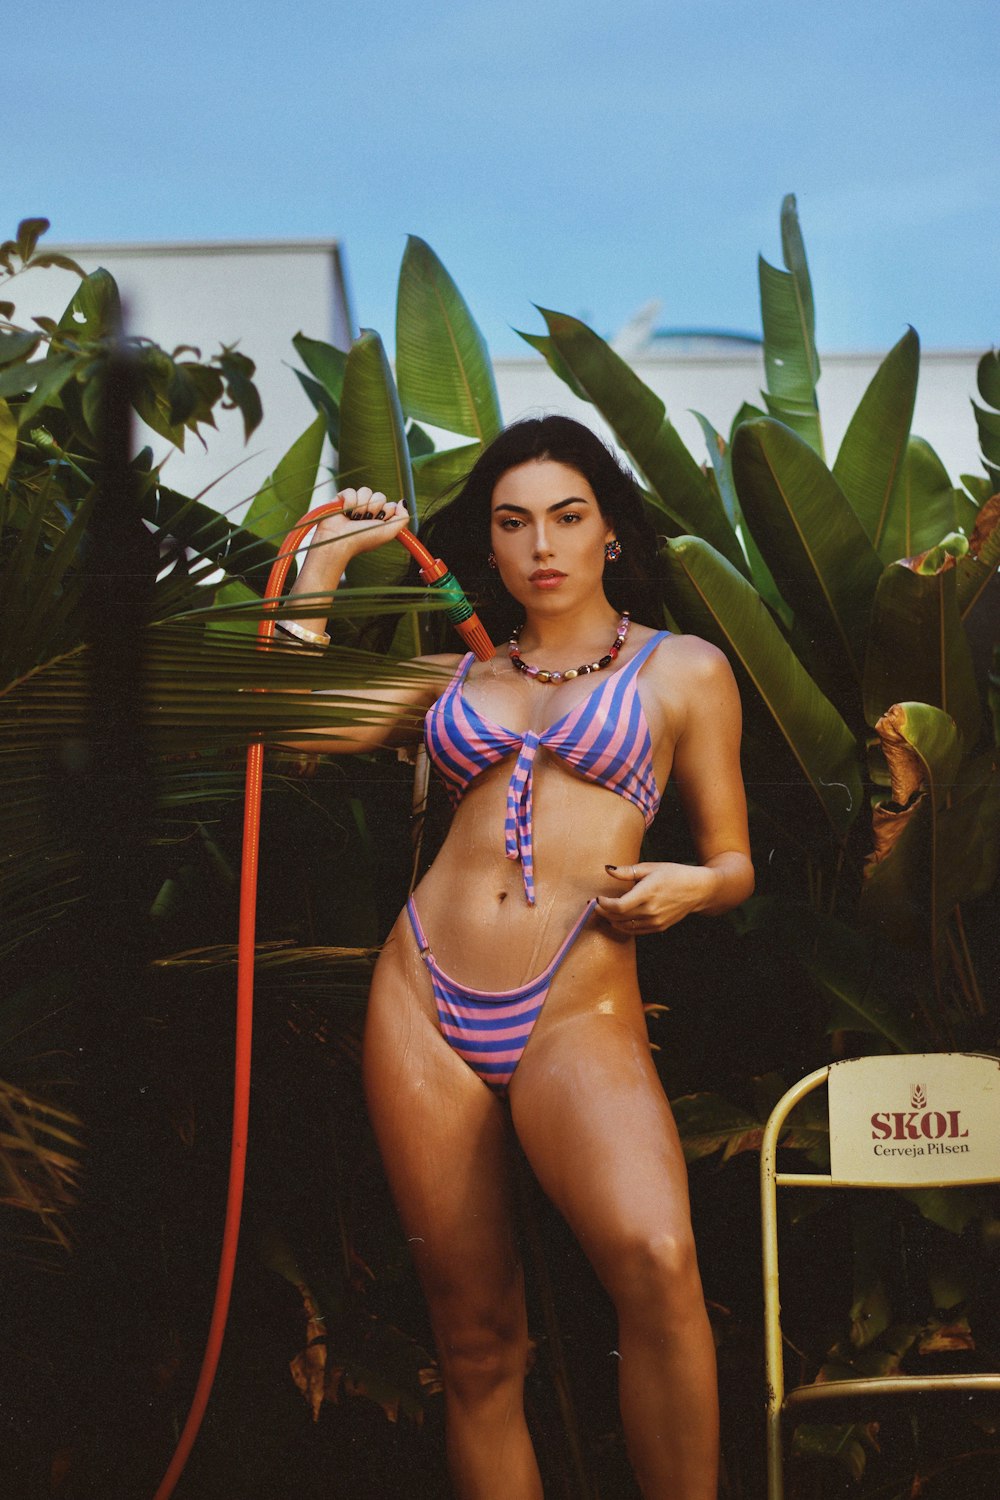 woman in blue and white bikini standing beside green plant